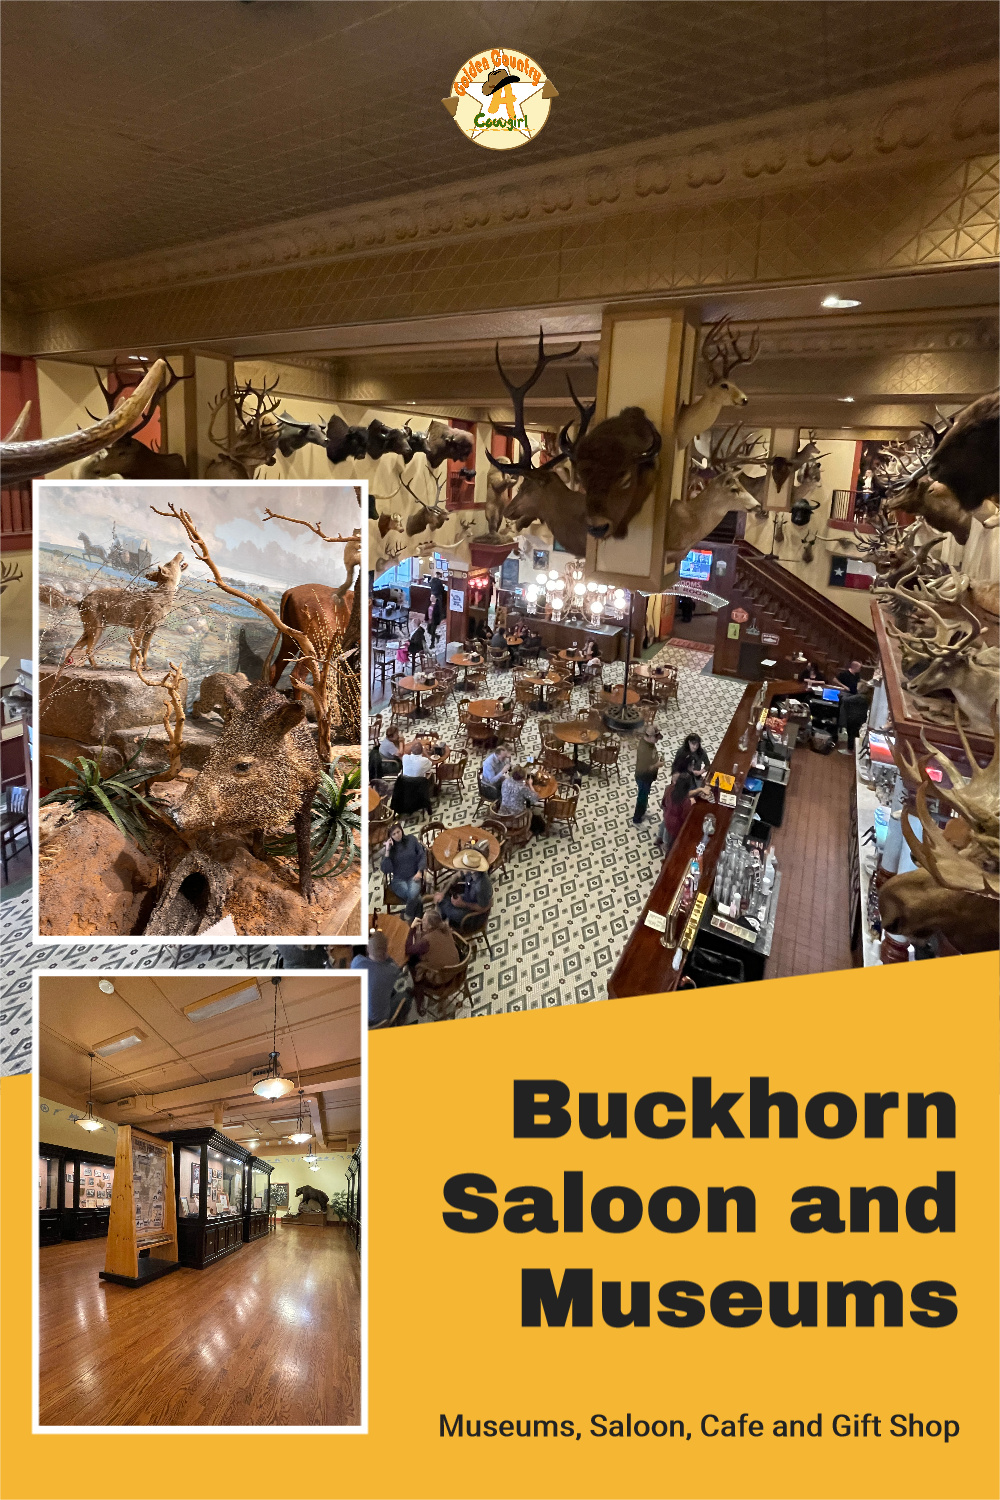 Buckhorn Saloon and Museums - Not What I was Expecting!